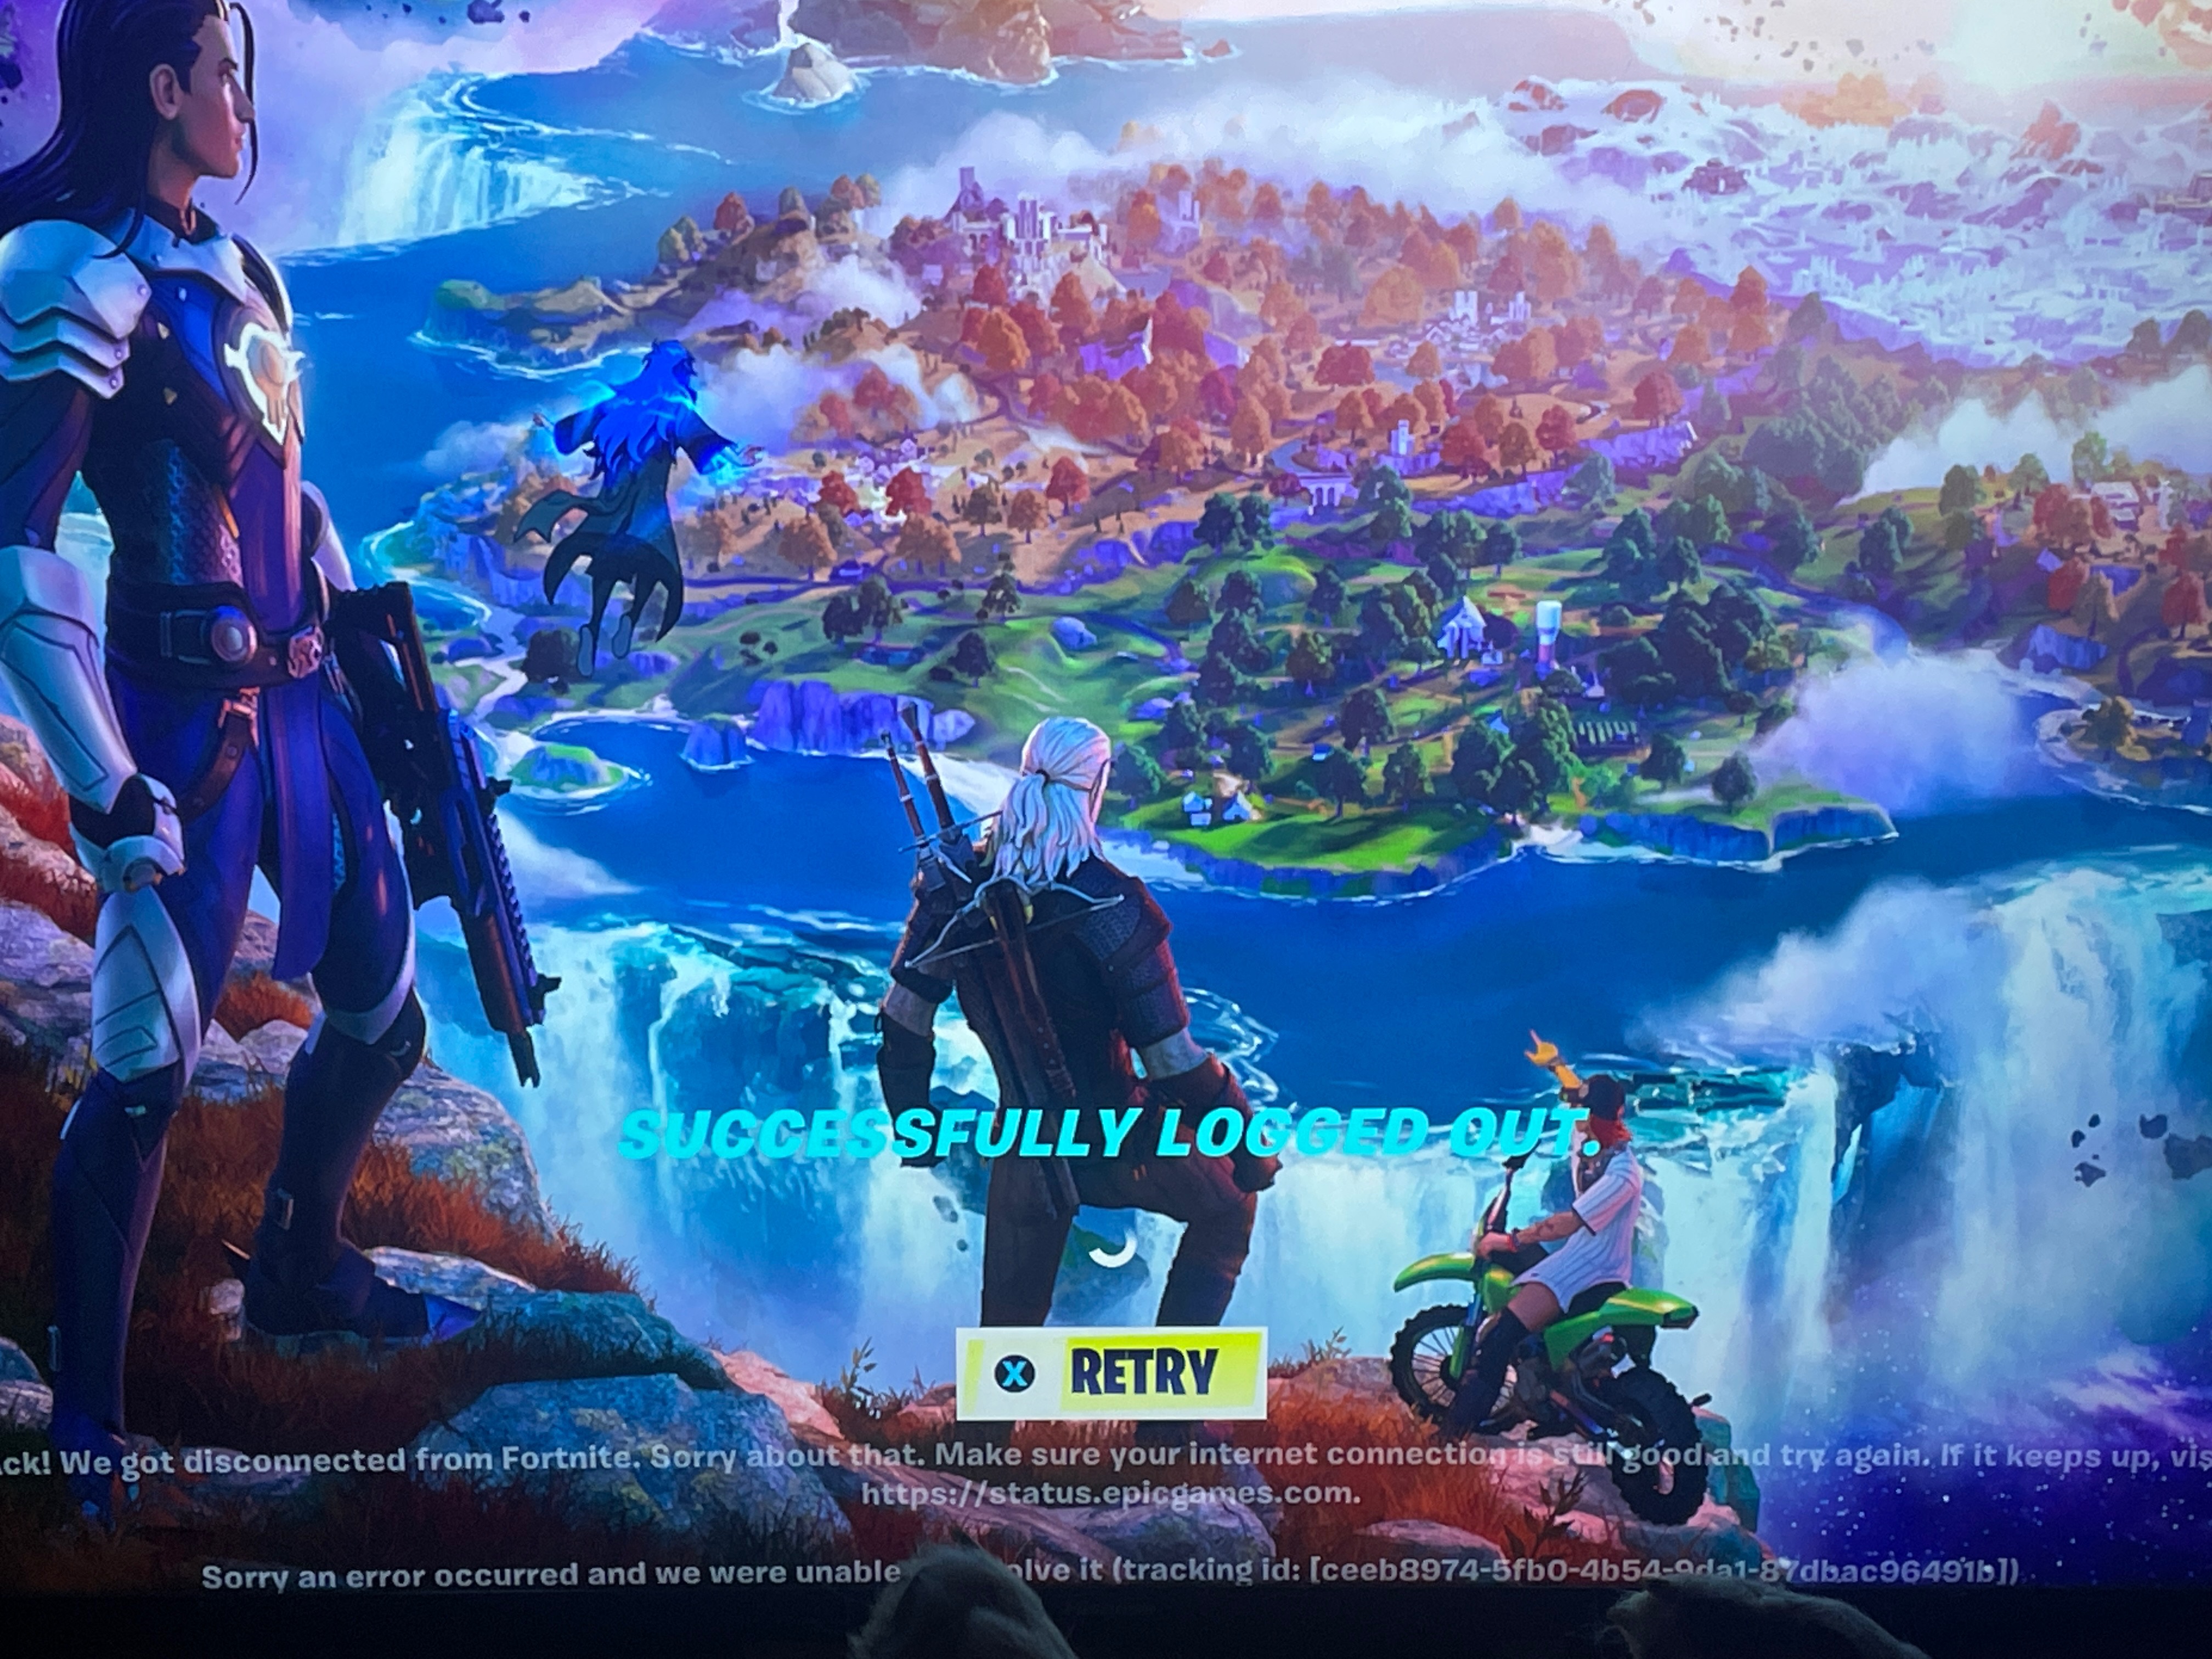 Fortnite “successfully logged out” - Microsoft Community